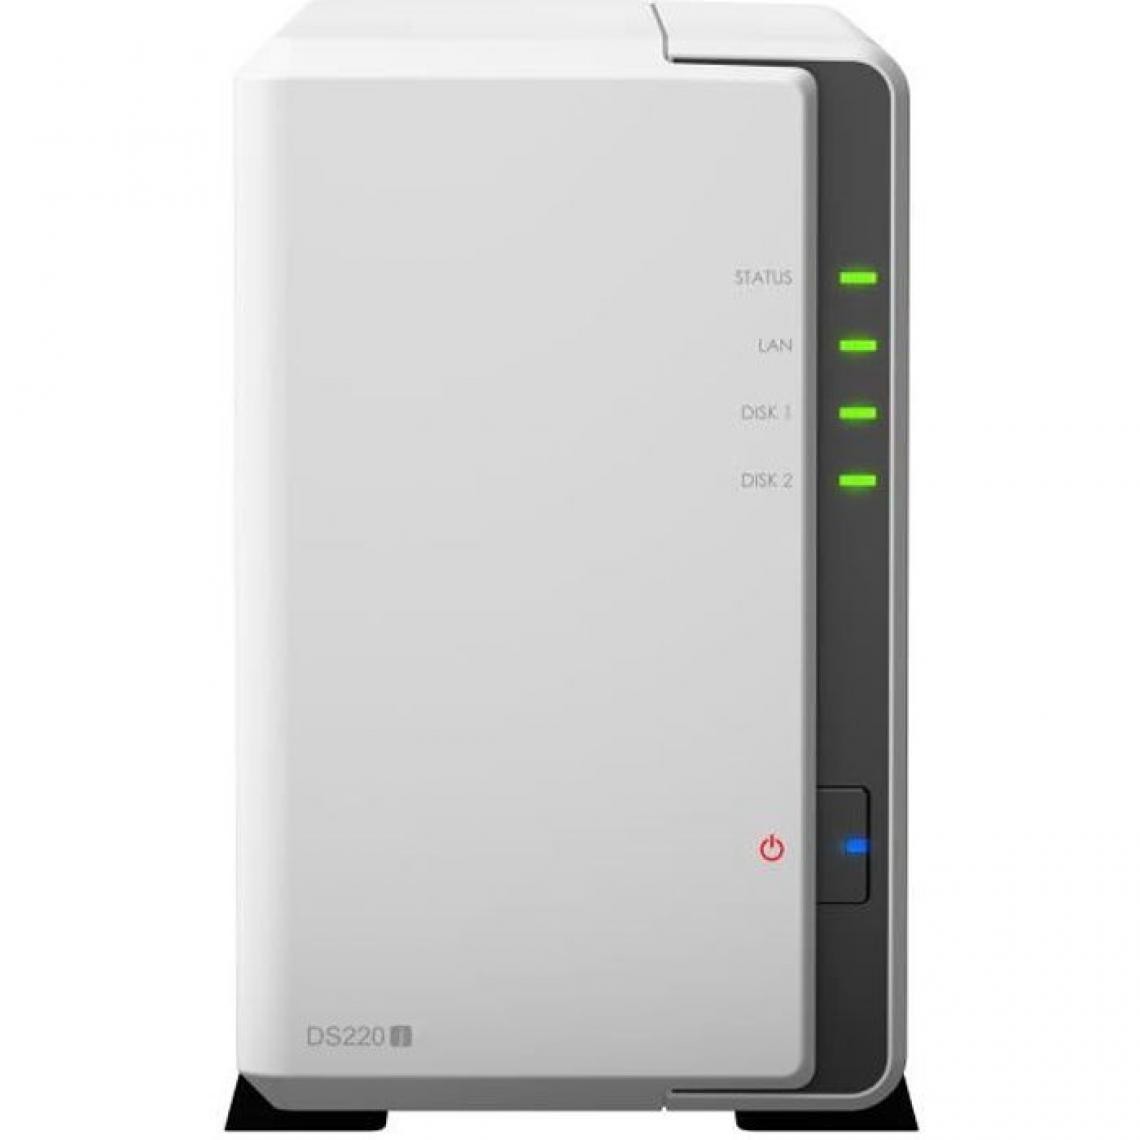 Synology - SYNOLOGY - Serveur de Stockage (NAS) - DS220j - 2 Baies - Boitier nu - NAS